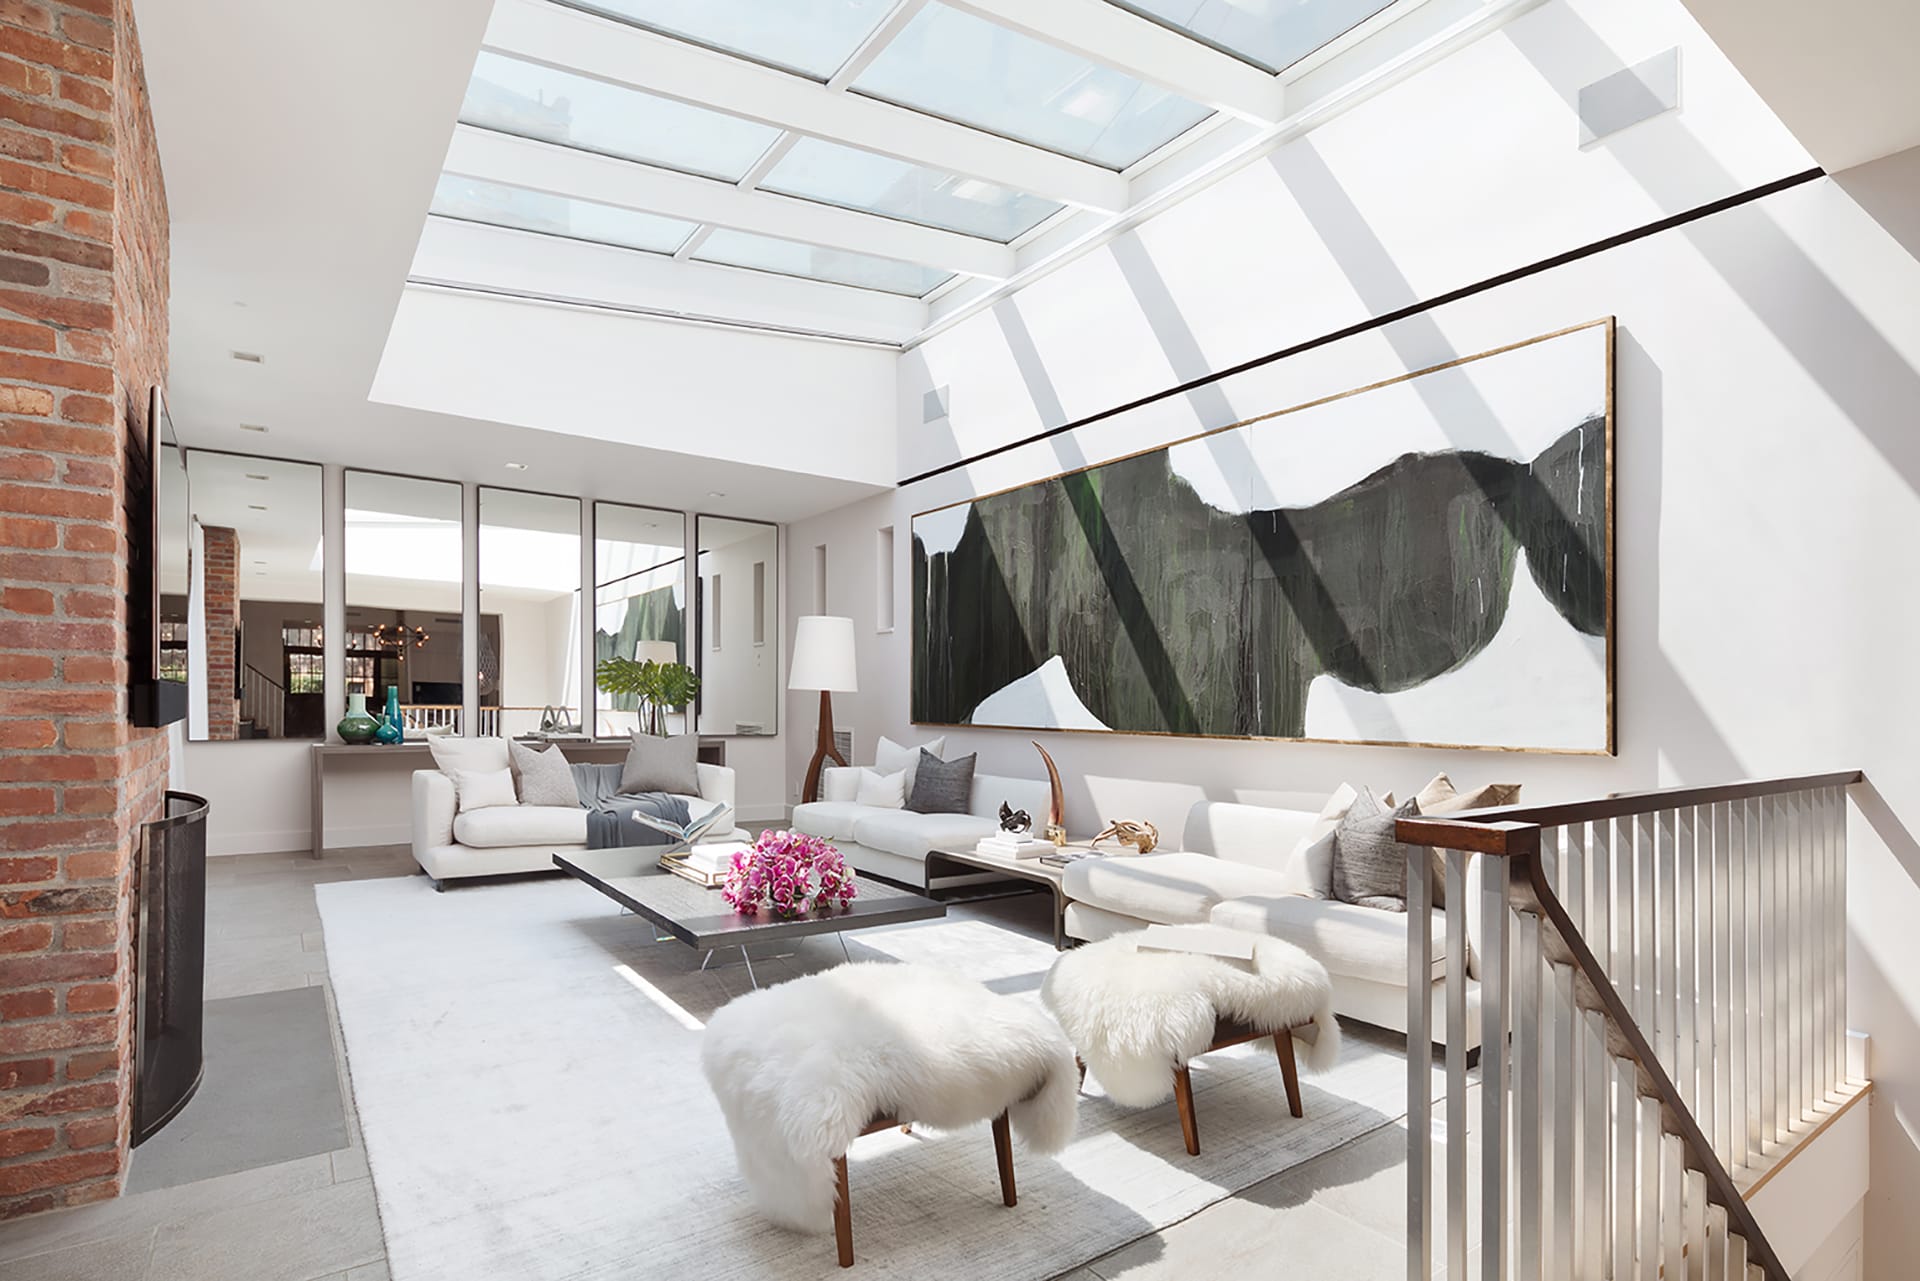 Living room with several large skylights, mirrors on the wall, and a large abstract painting